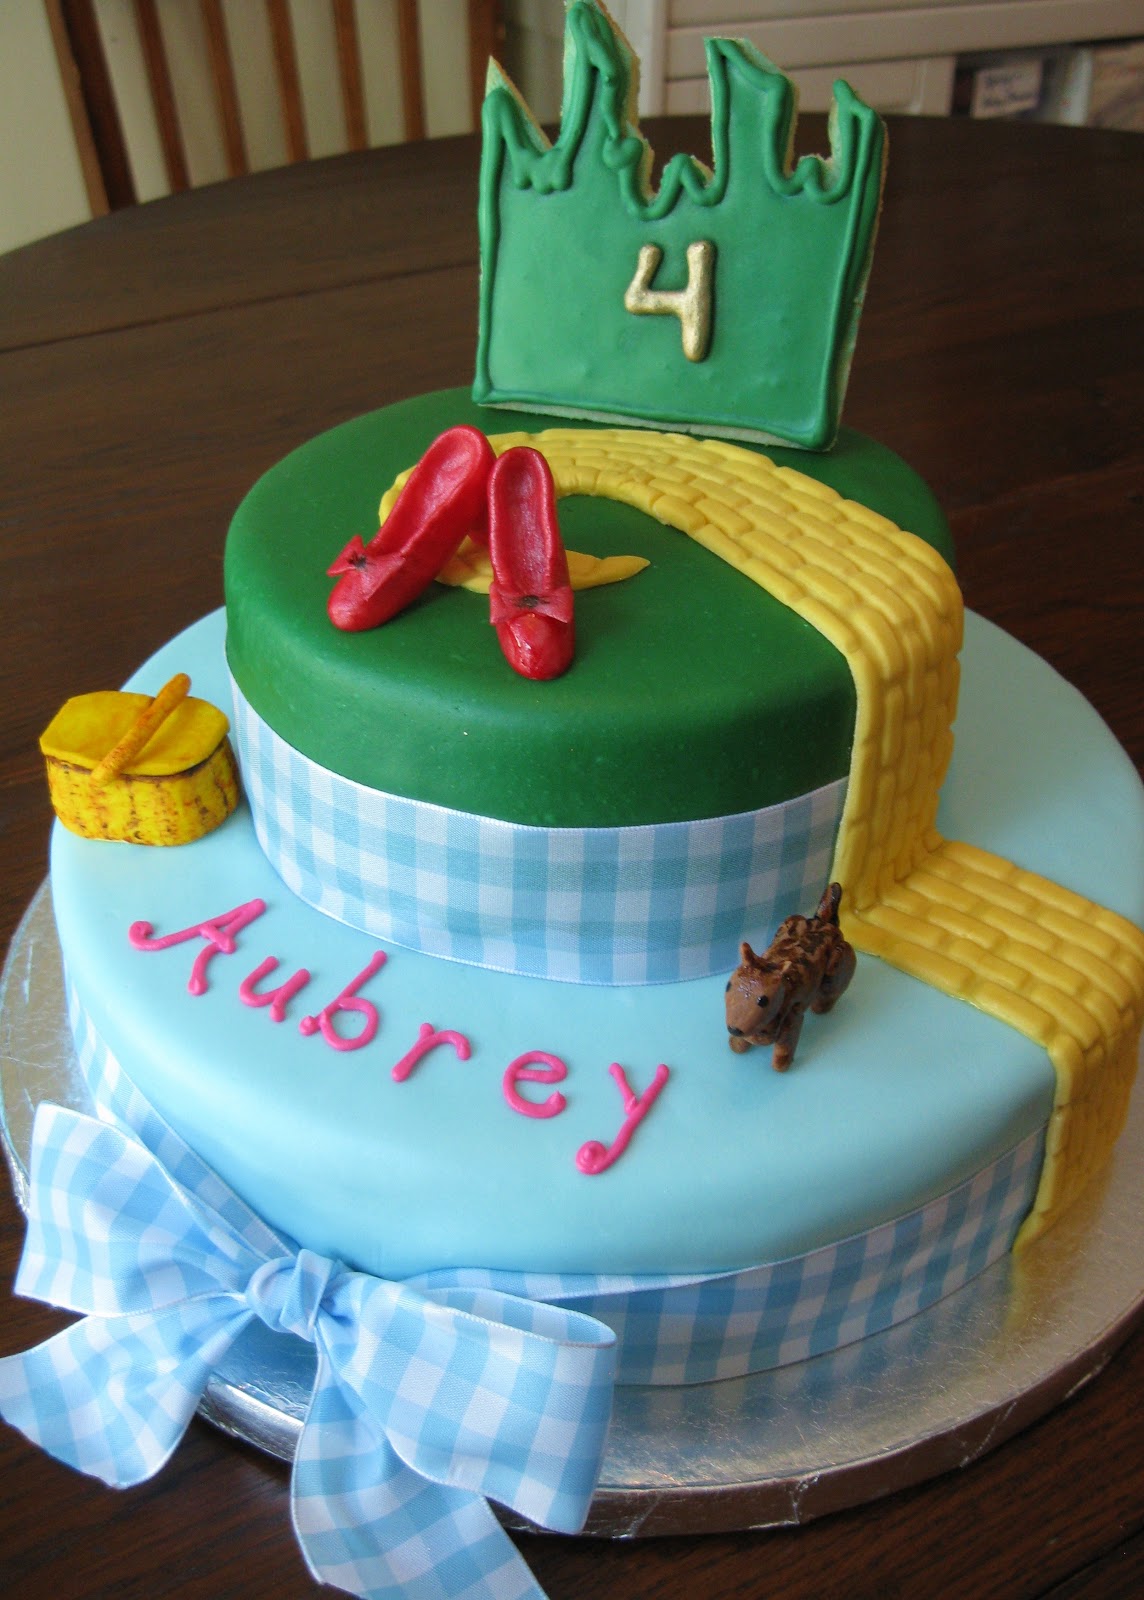 square chocolate cake with strawberries Wizard of Oz cake for a four-year-old girl's birthday